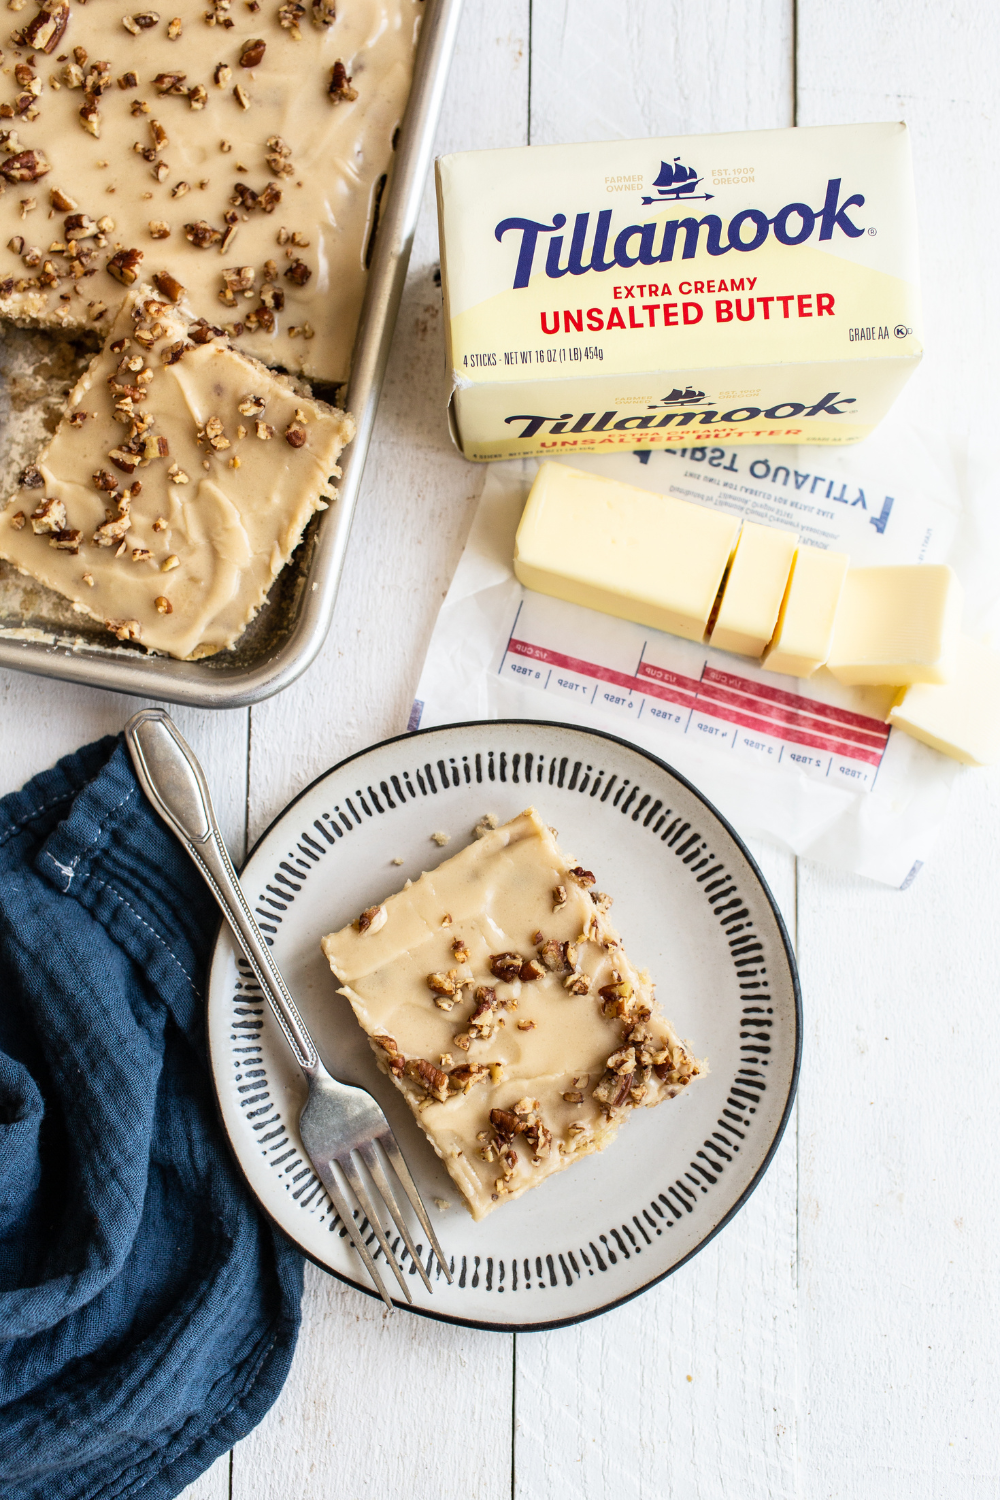 Tillamook butter is one of the key ingredients here!